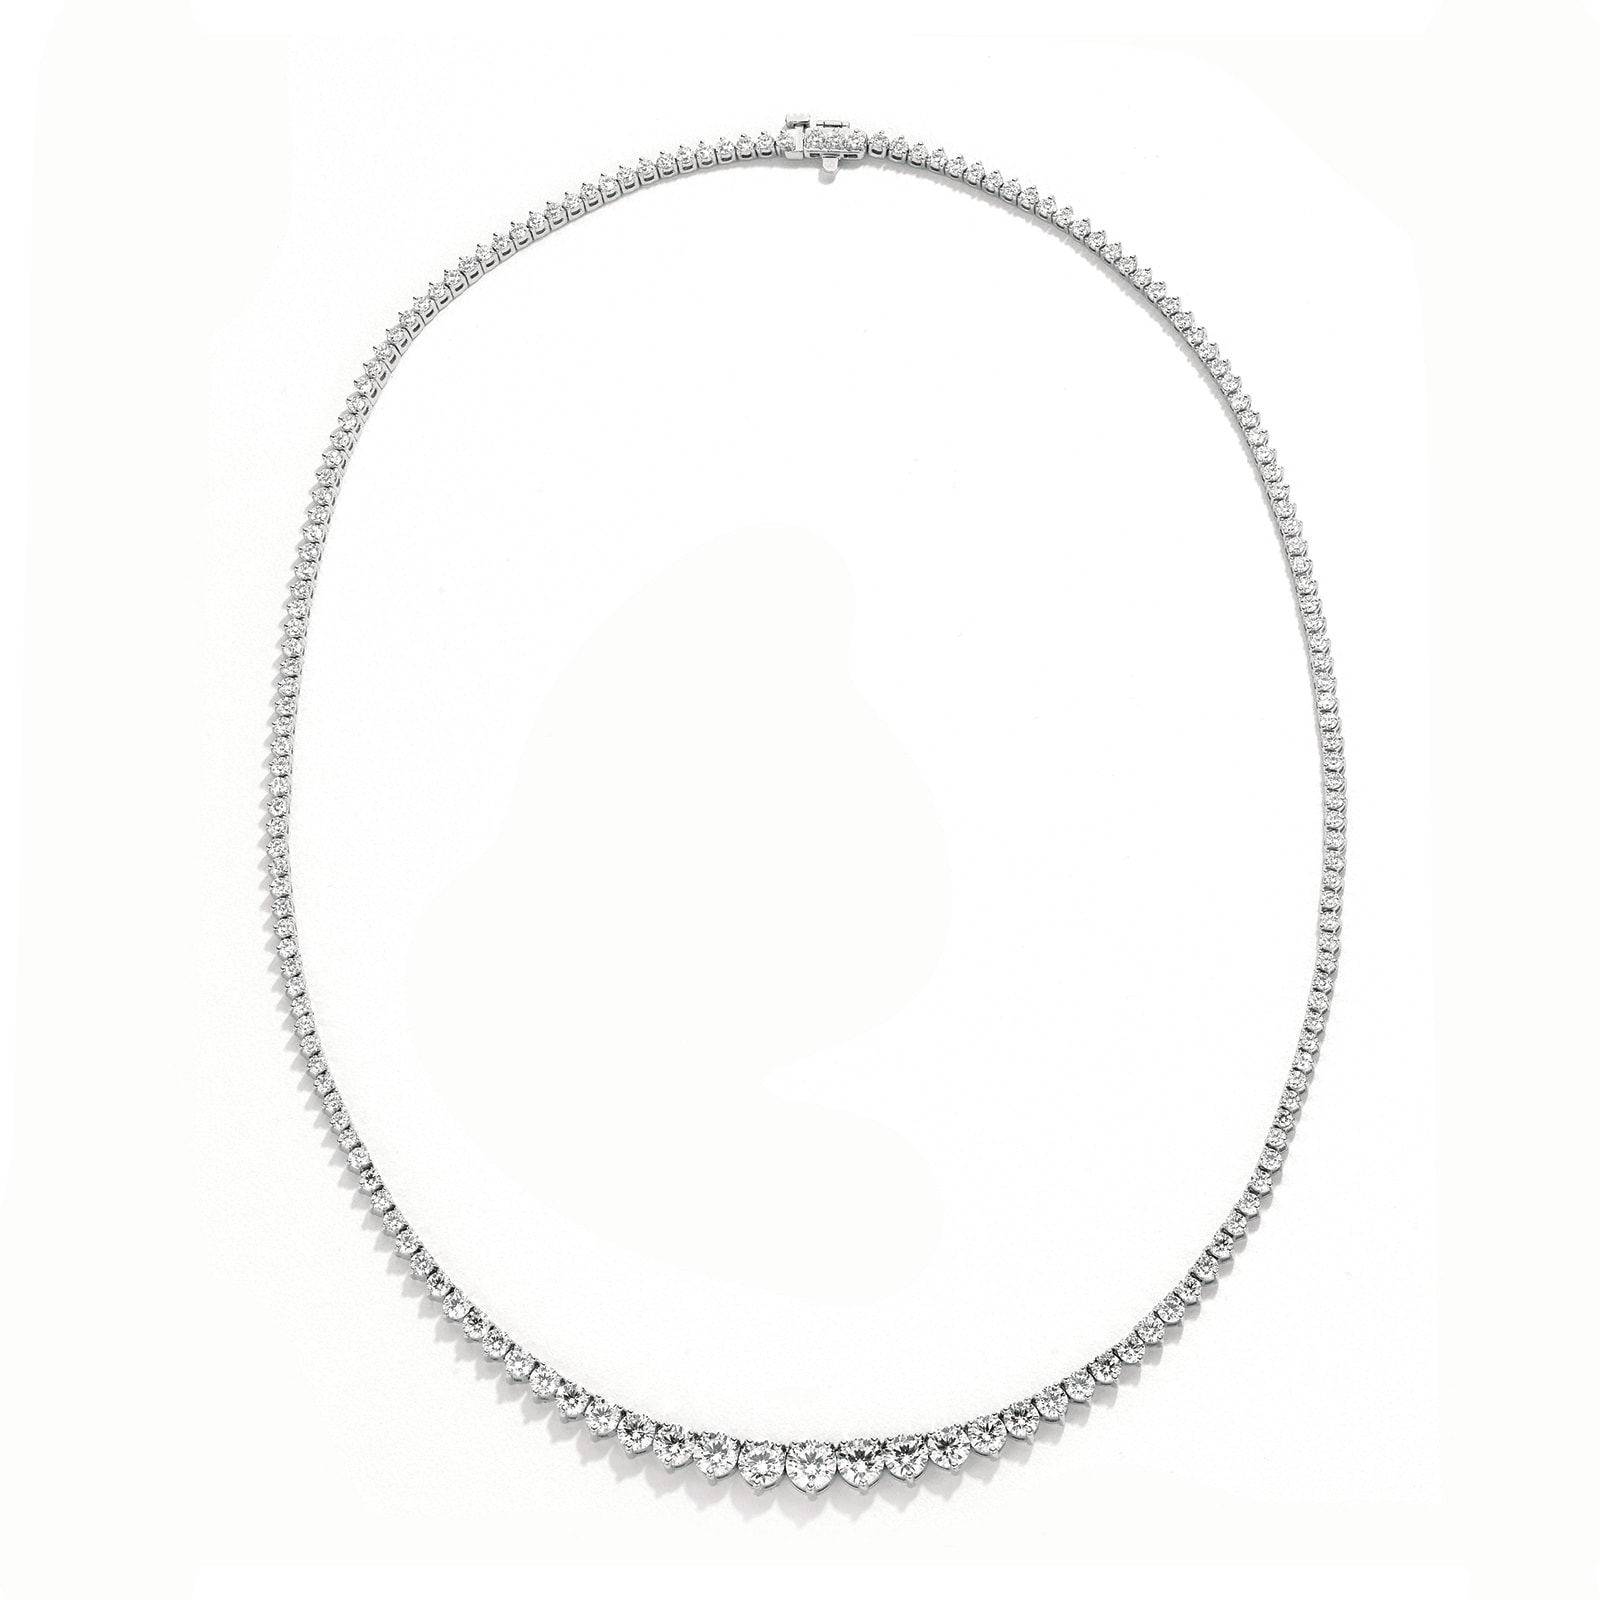 18k White Gold 10.17cttw Diamond Graduated Necklace - 17 Inch